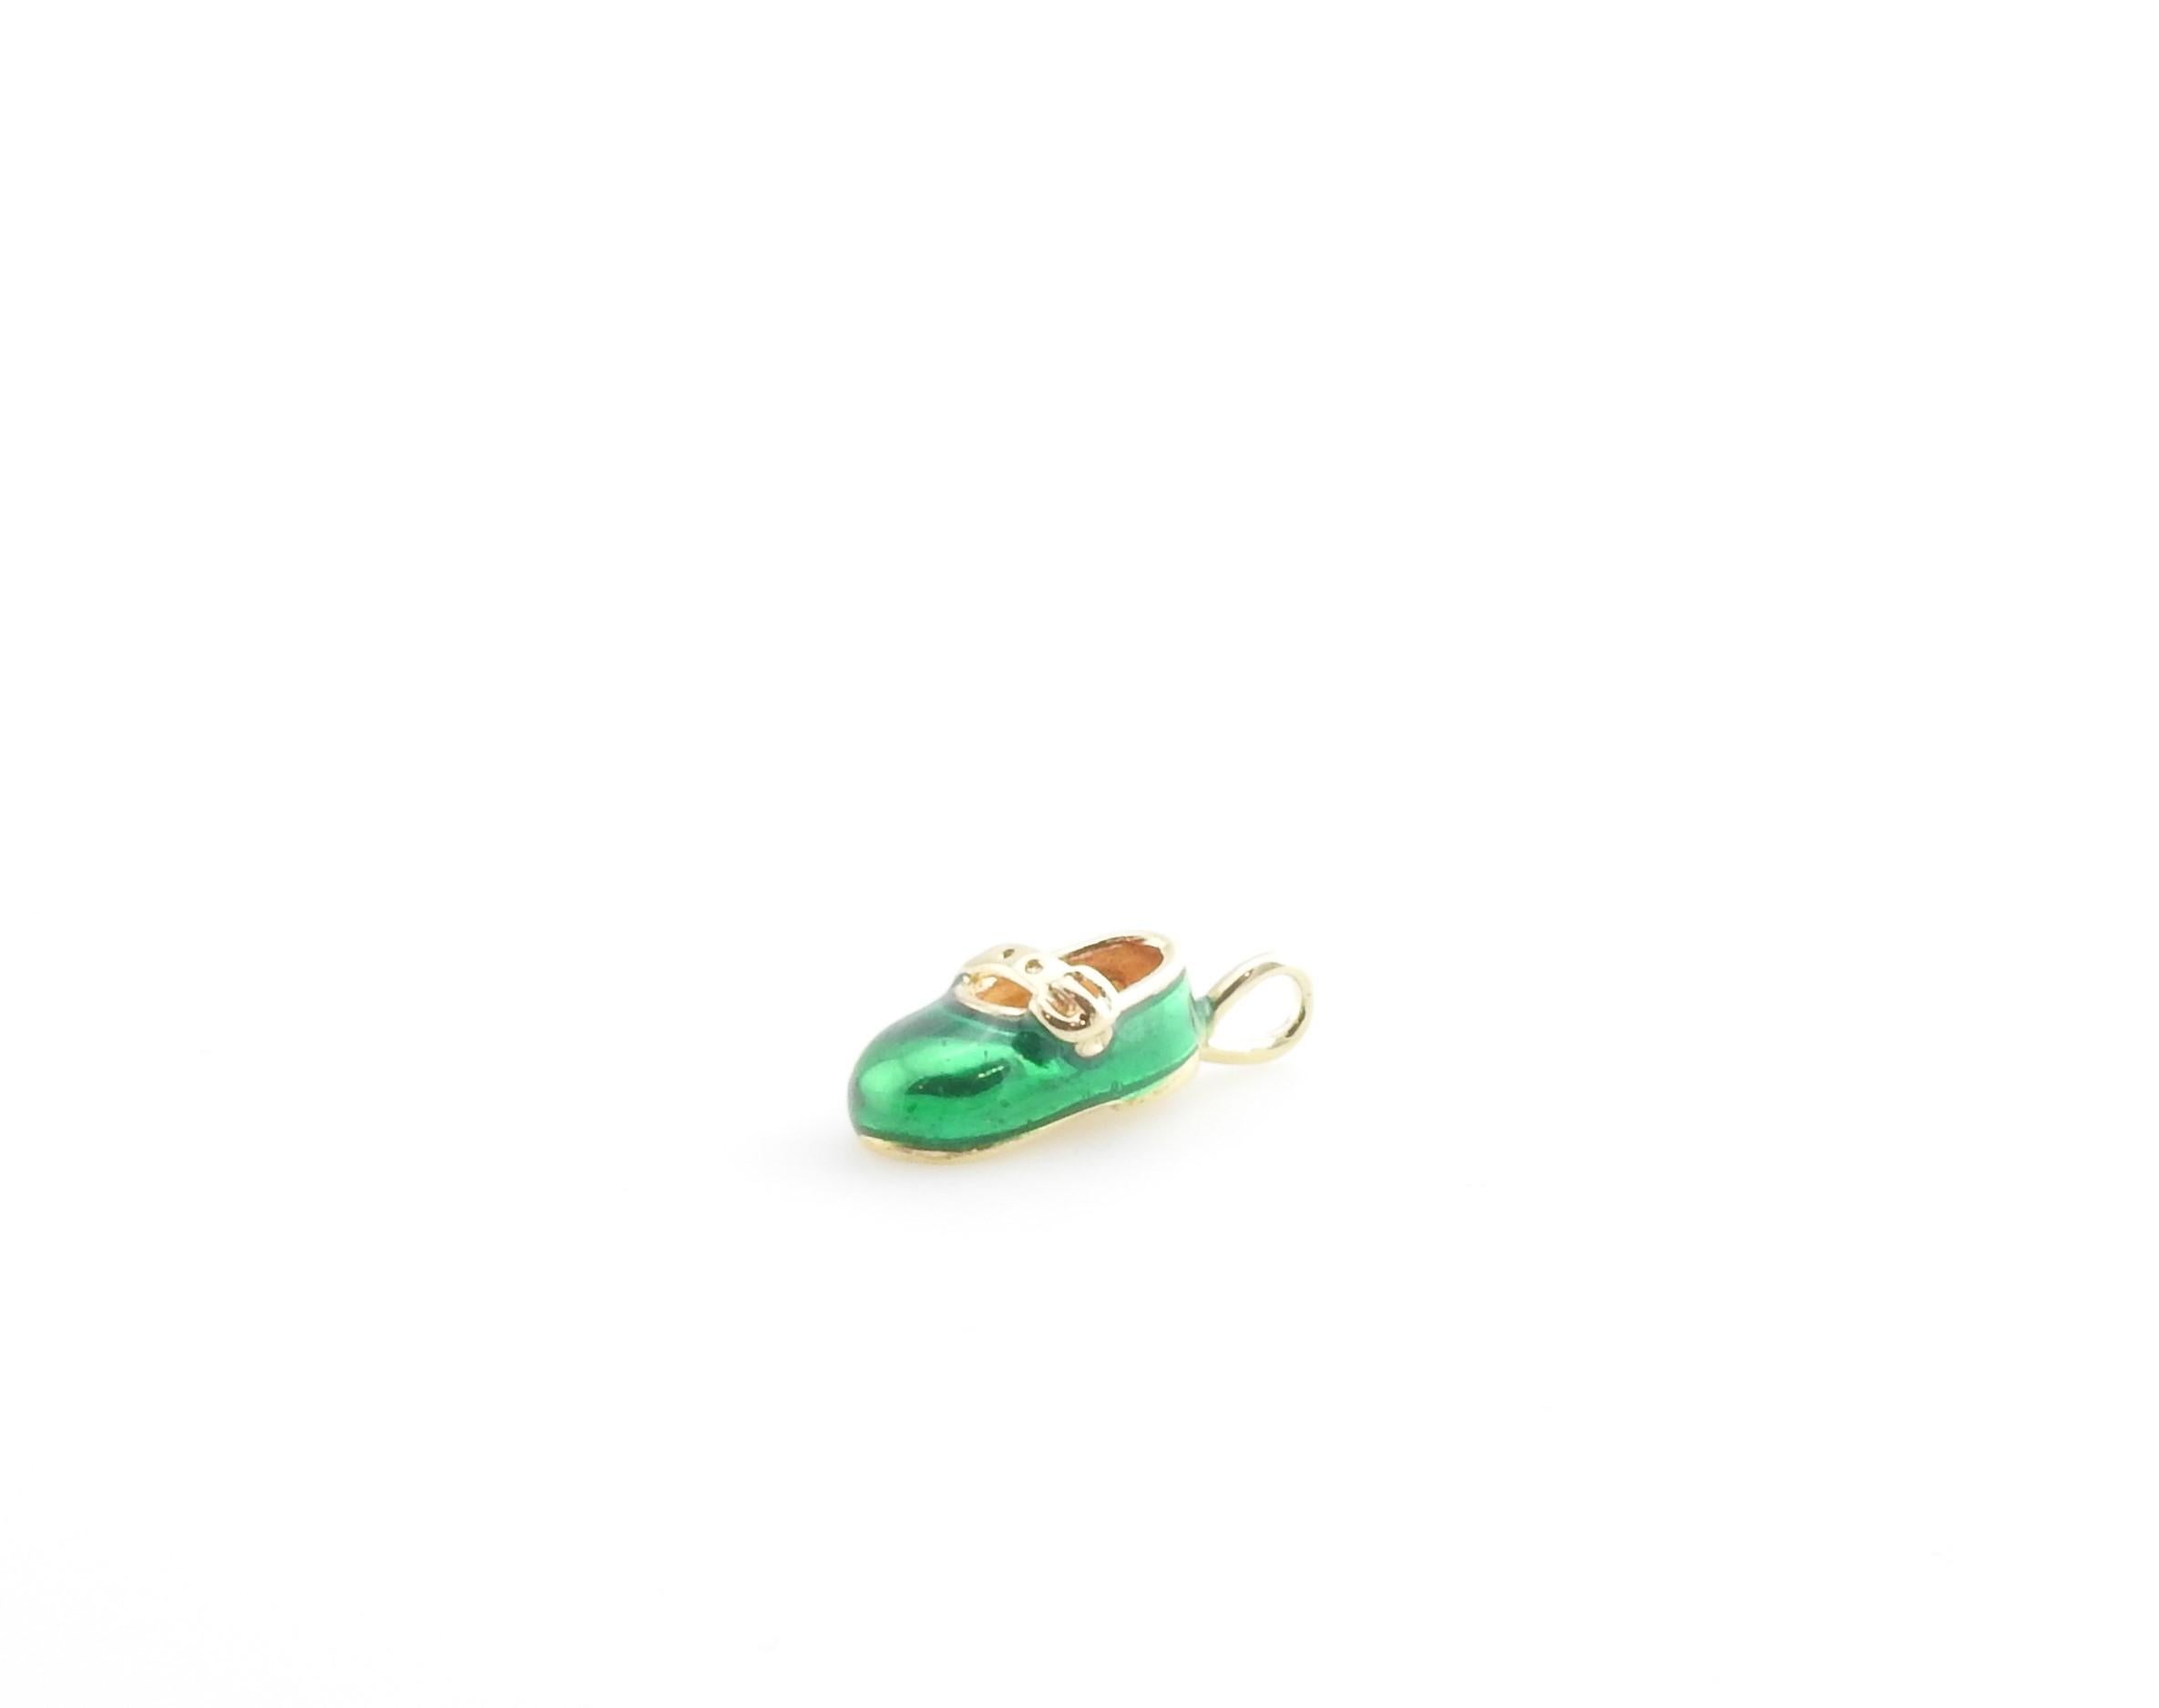 Vintage 10 Karat Yellow Gold and Green Enamel Baby Shoe Charm

Celebrate baby's first steps!

This lovely 3D charm features a miniature baby shoe accented with green enamel and crafted in beautifully detailed 10K yellow gold.

Size: 13 mm x 7 mm